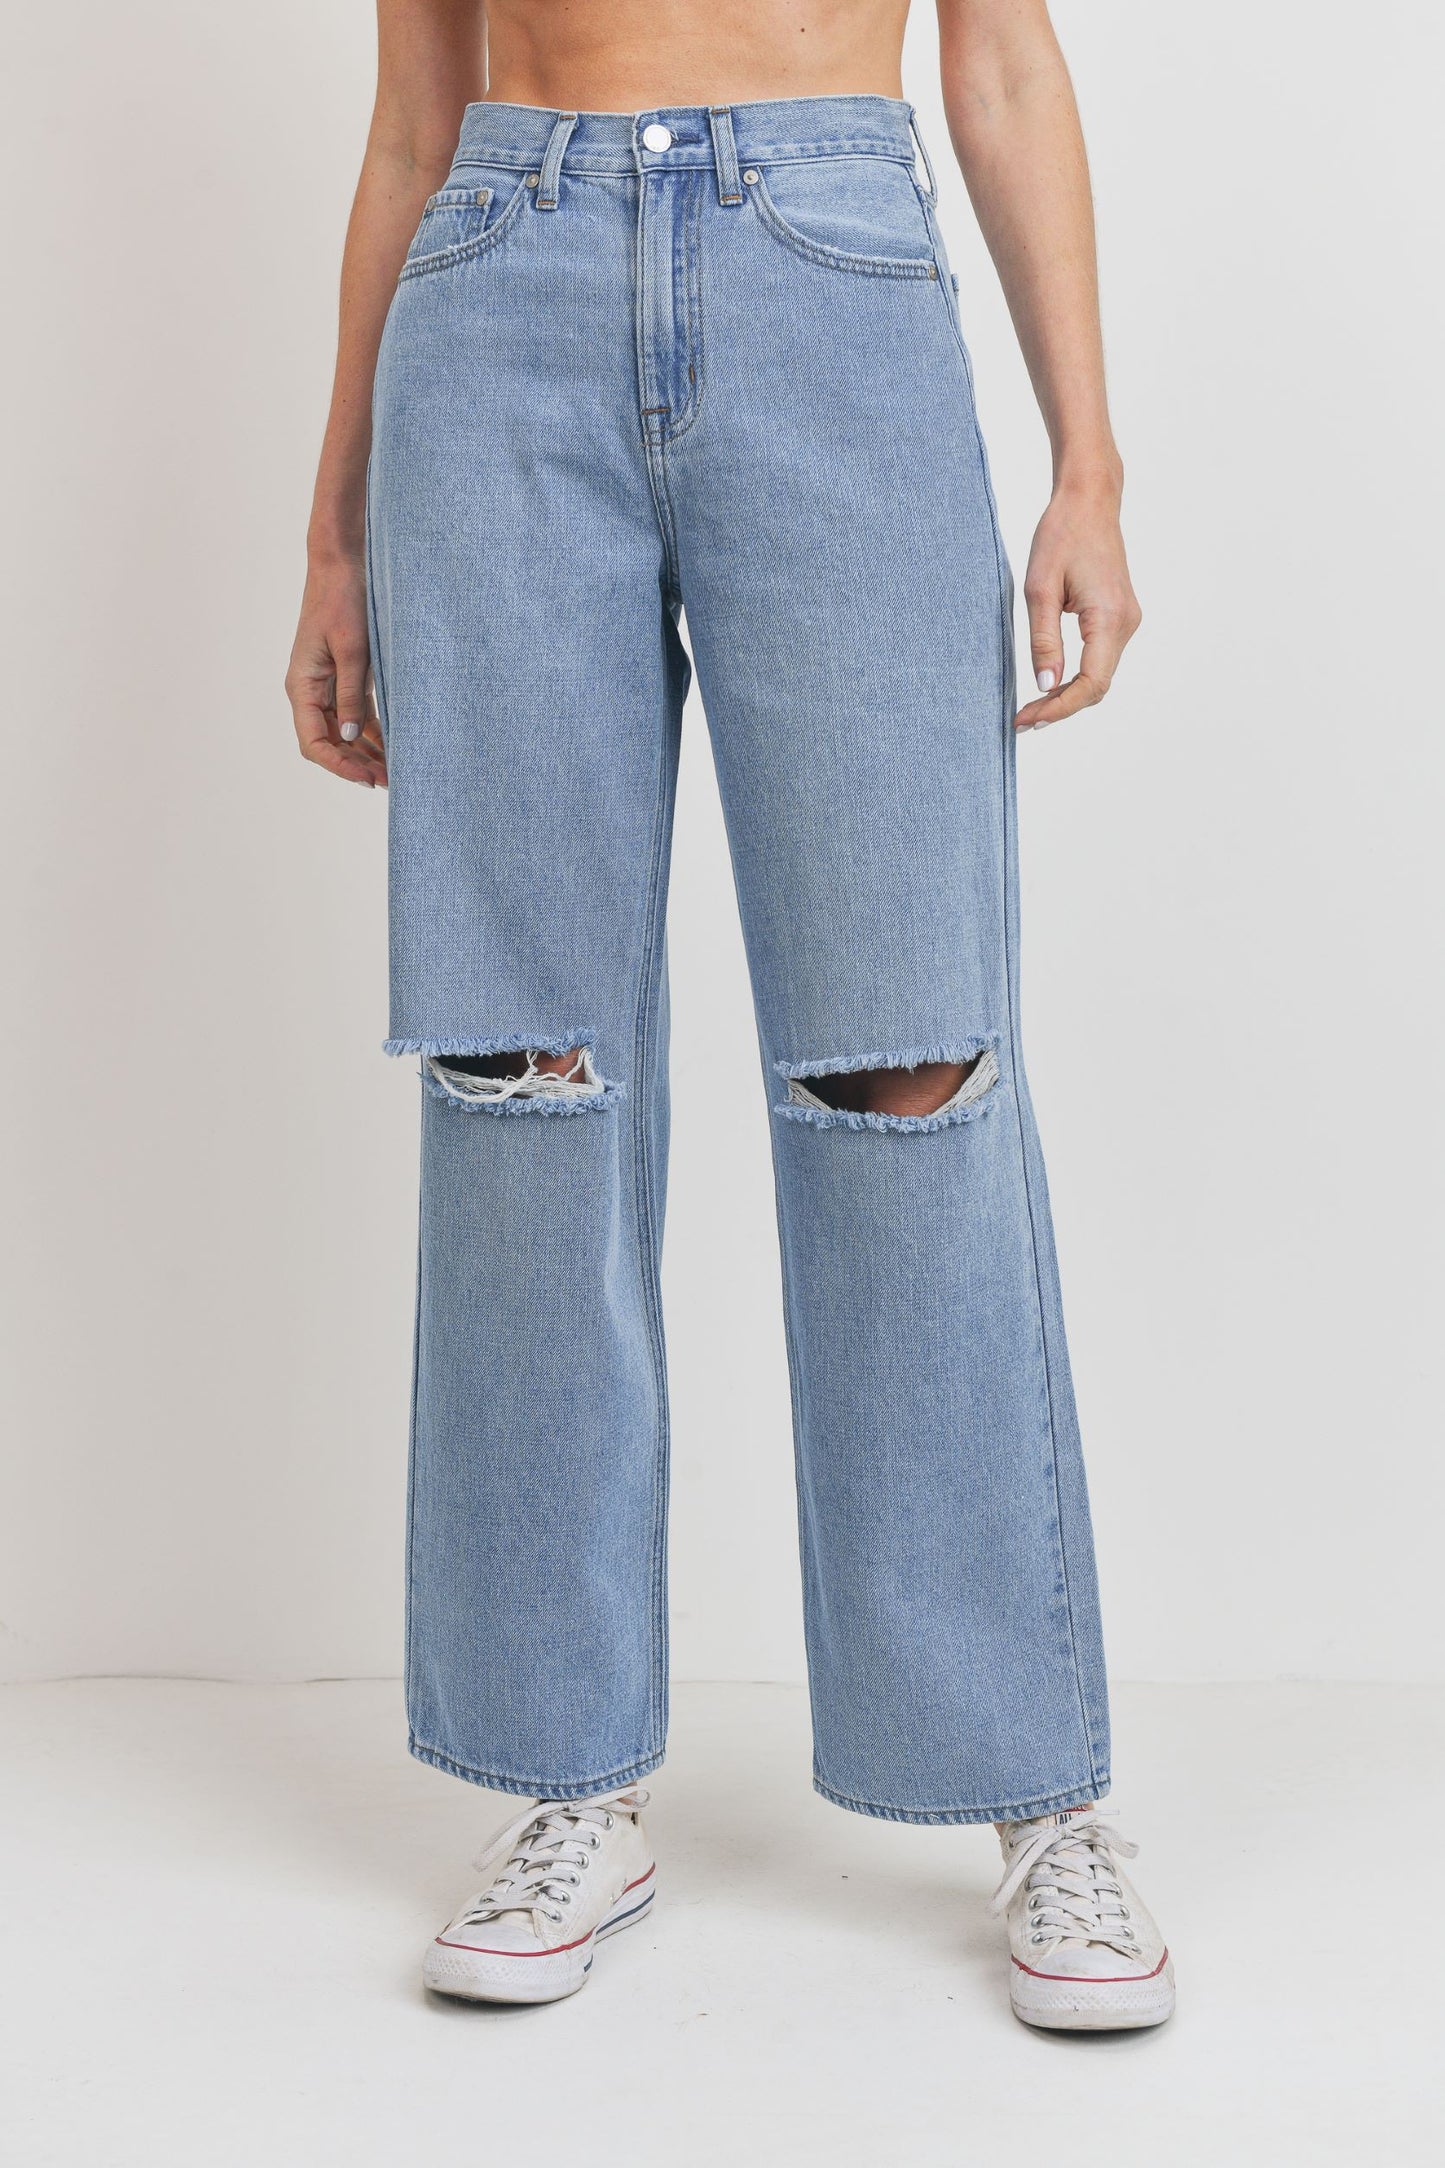 CINCHED WAIST WIDE LEG JEANS WITH KNEE SLITS